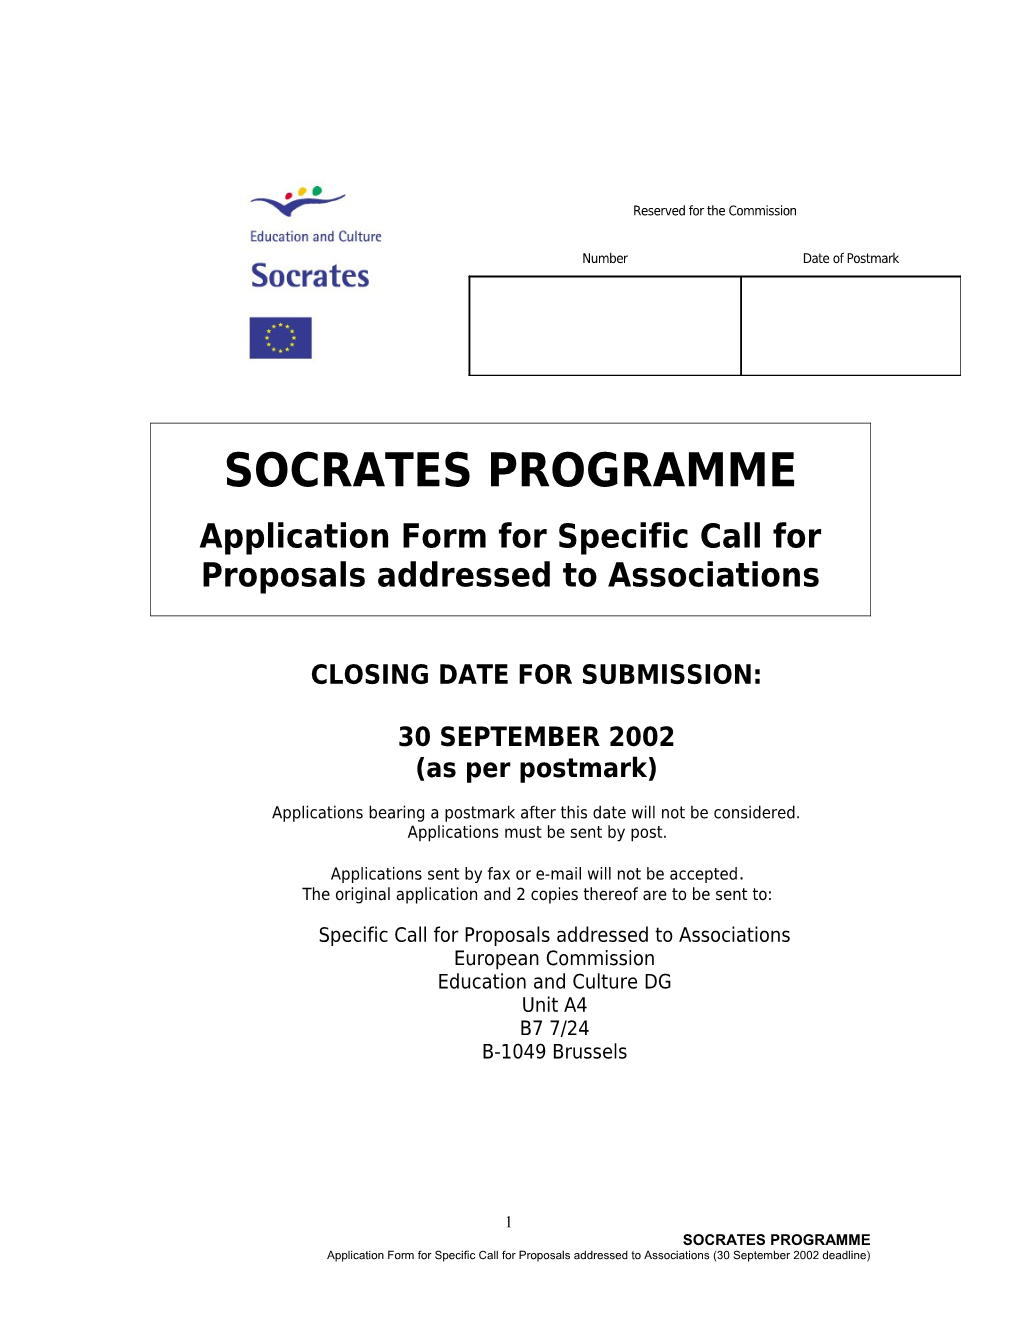 Application Form for Specific Call for Proposals Addressed to Associations